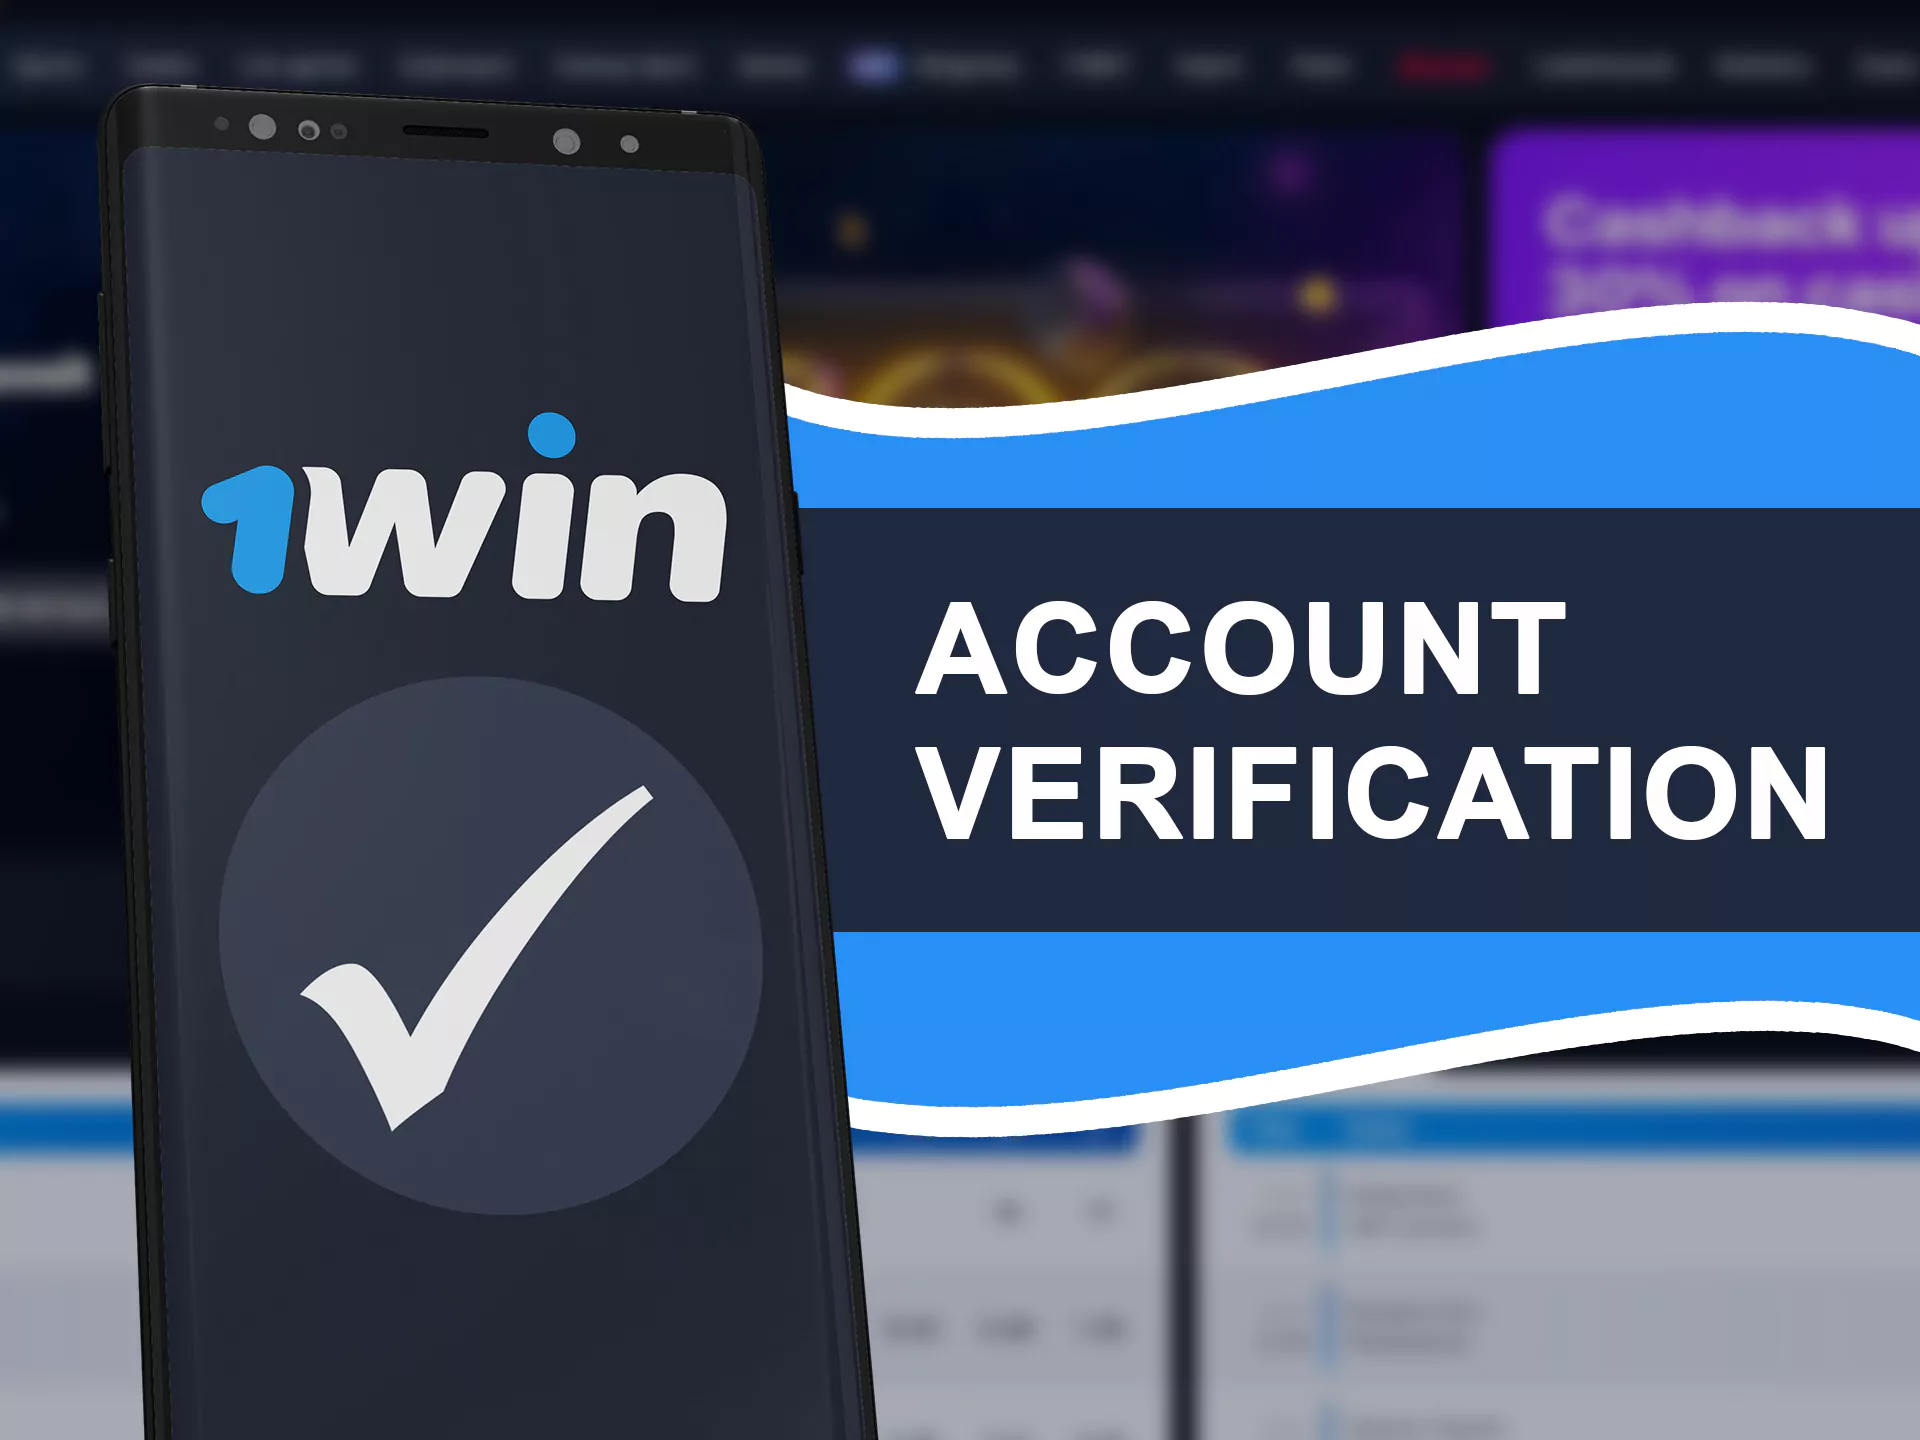 Verify your account for a full betting experience.